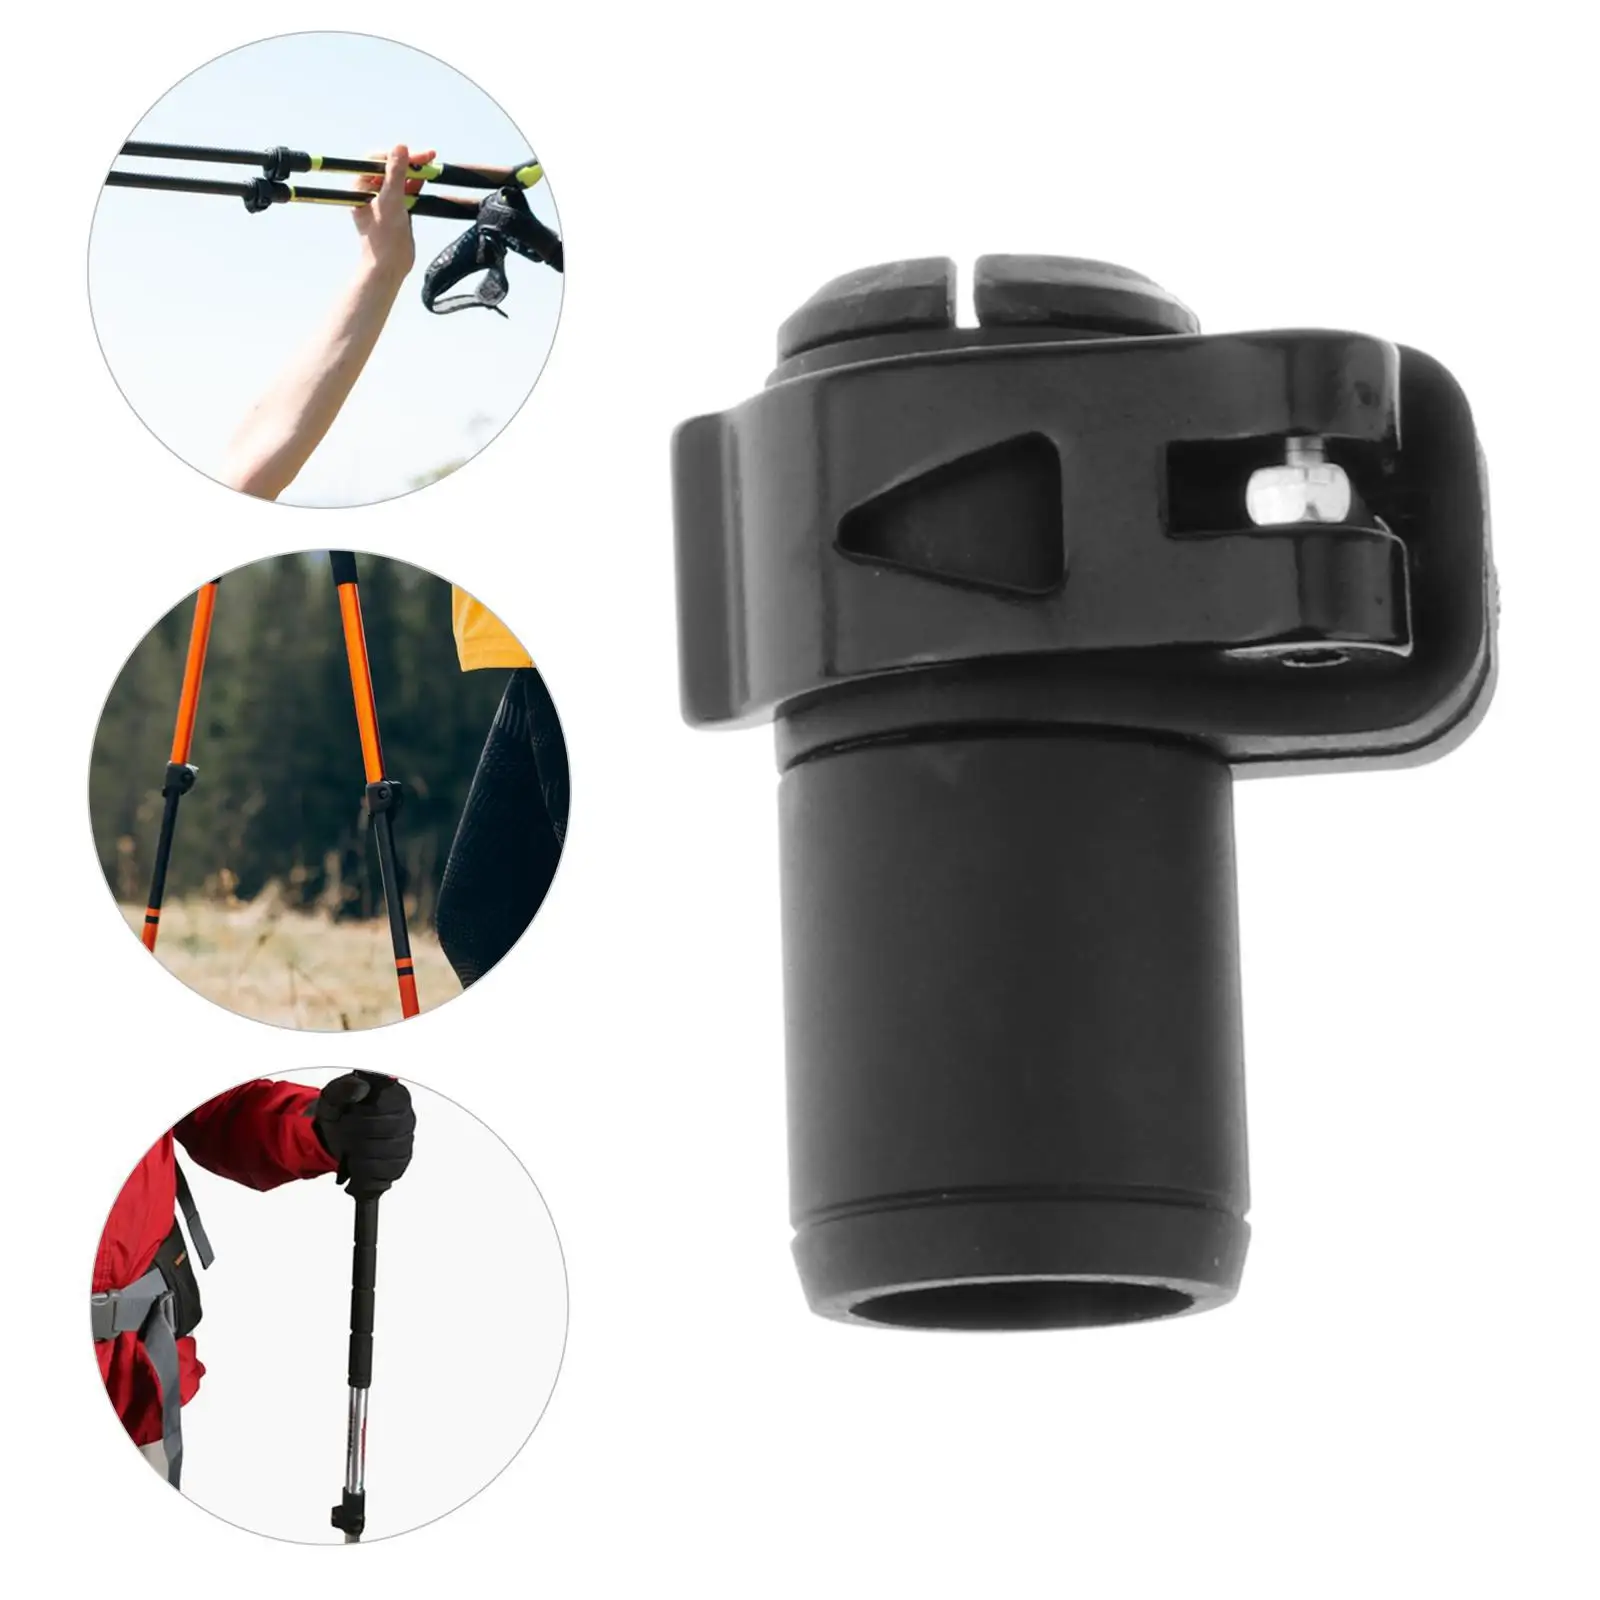 Walking, , Hiking Pole Accessories, Clip, Walking, , Climbing Pole External, Lock for Backpacking